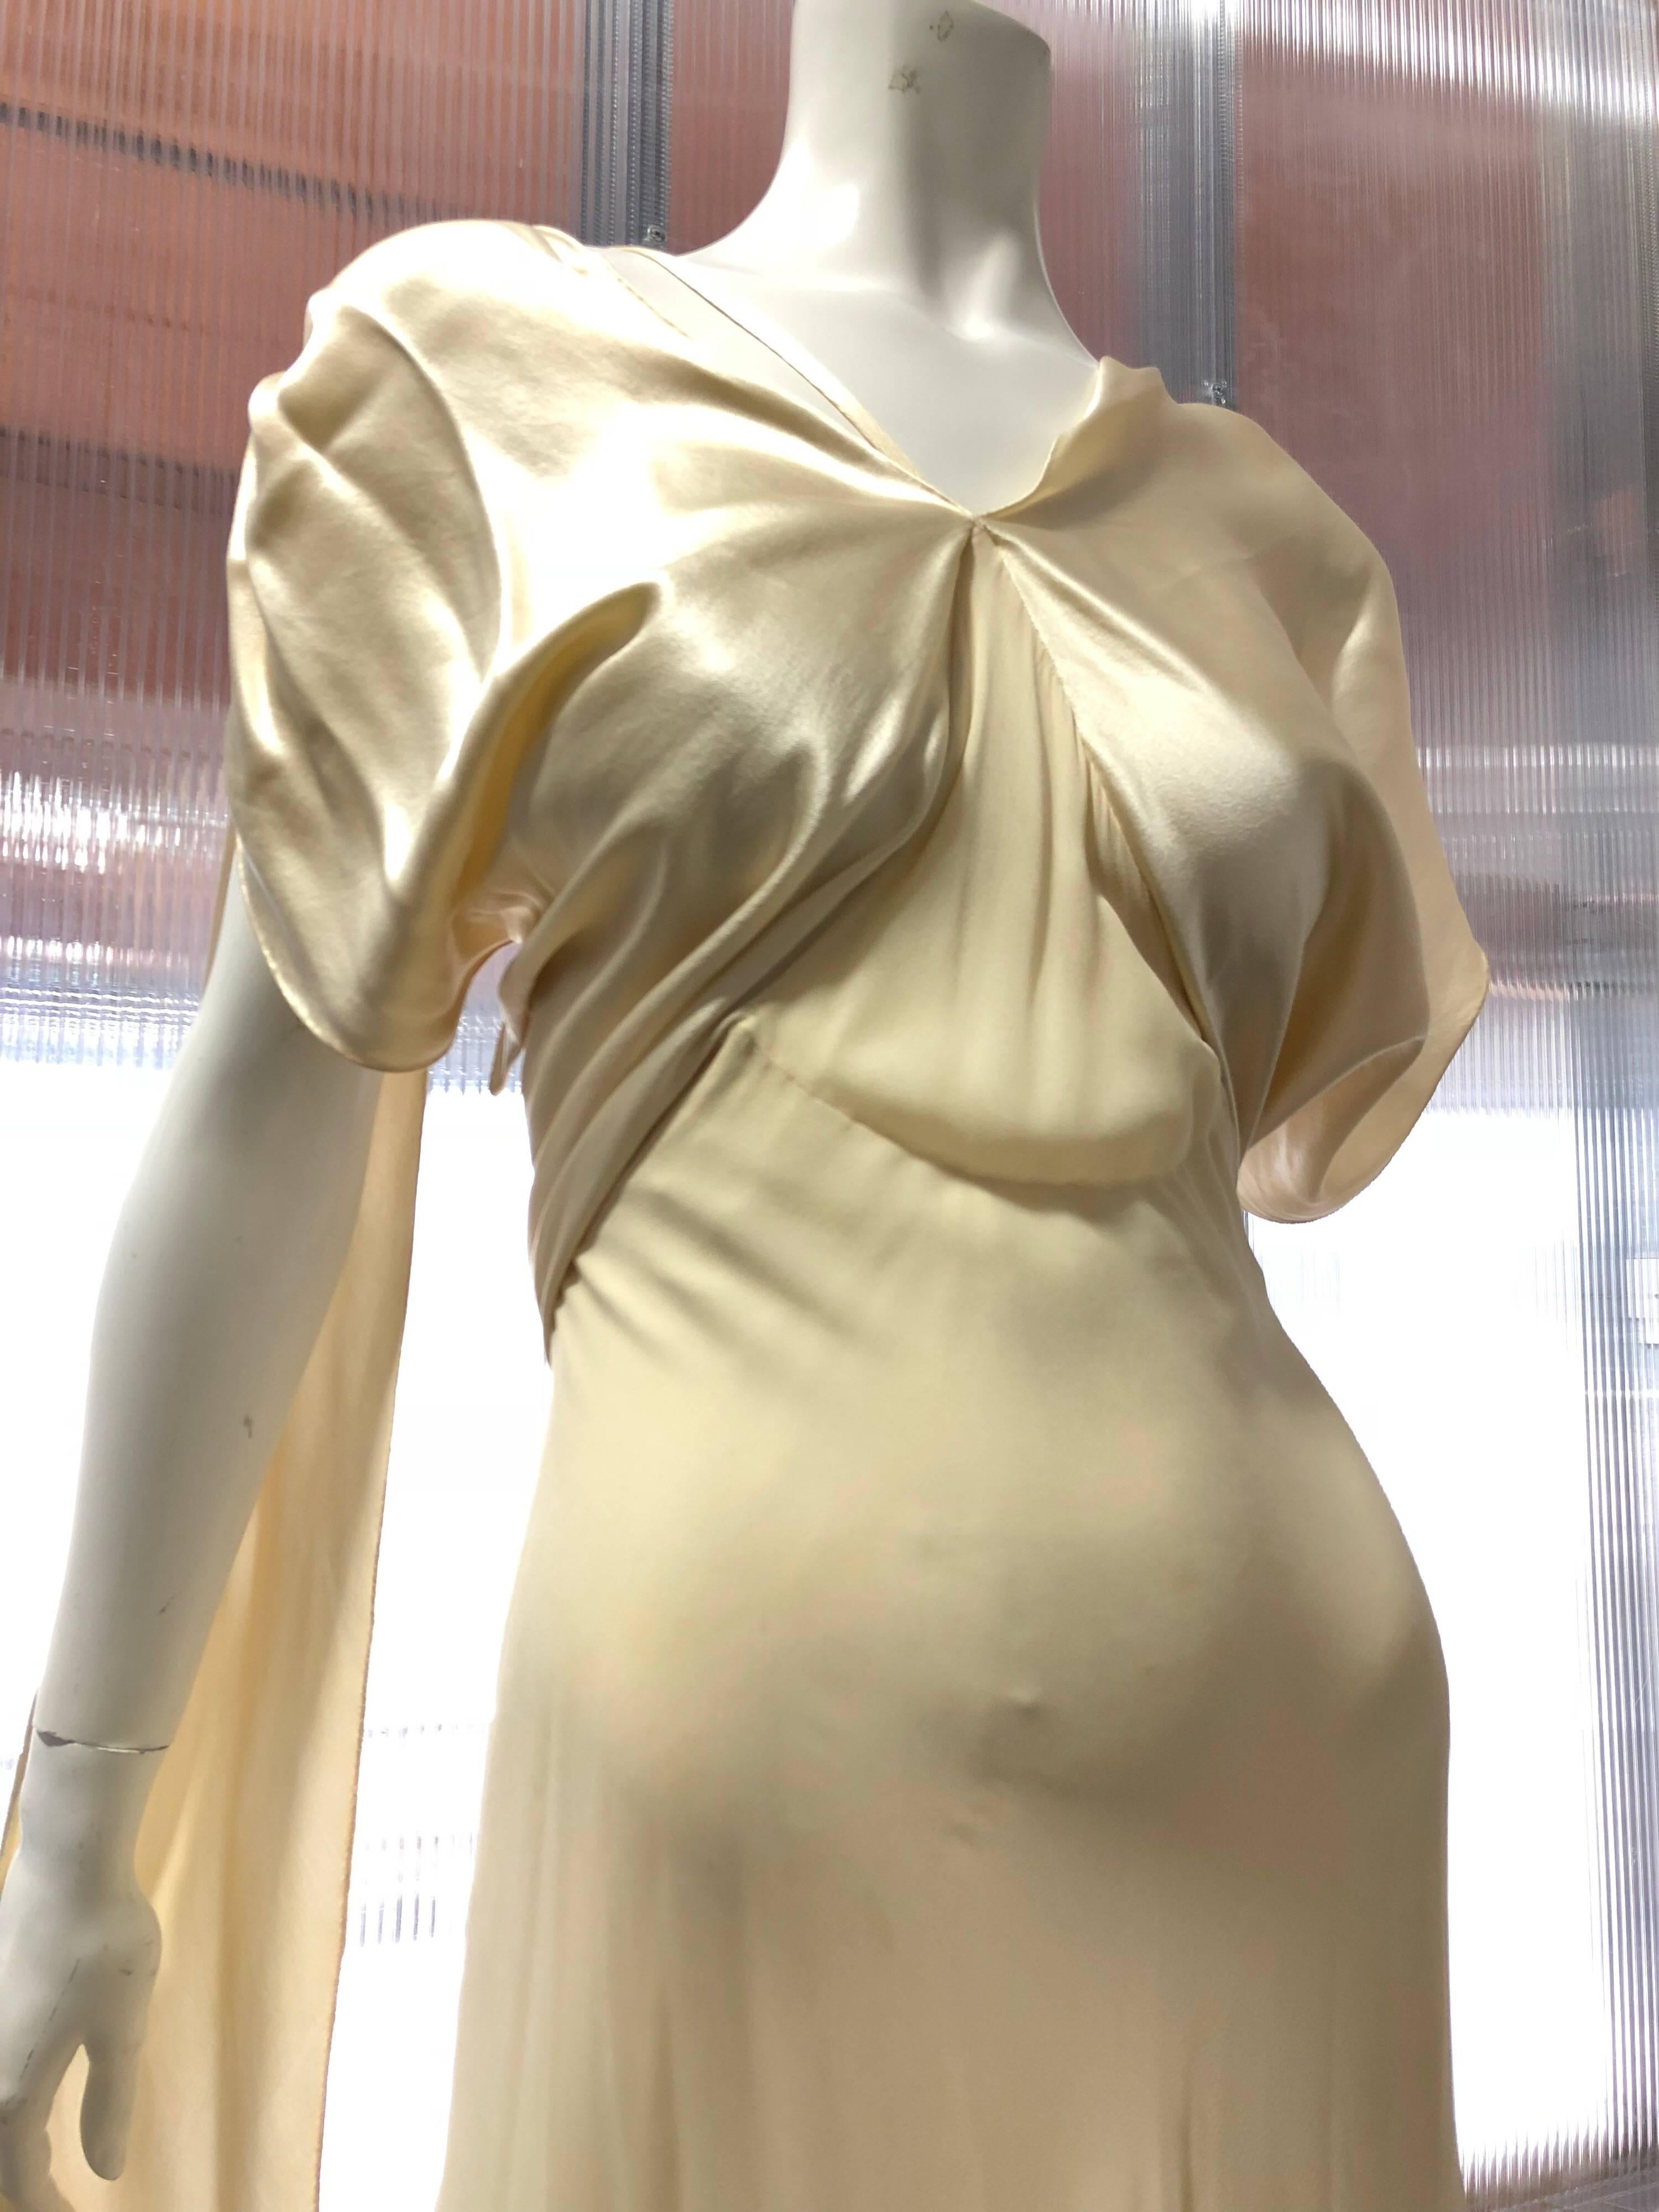 Late 1930s Hattie Carnegie museum-quality condition Art Deco bias cut slip gown in layers of chiffon with godets at hip. Bodice is a draped silk satin bias panel that flows across the back to form a foulard panel framed low-cut back. Vintage